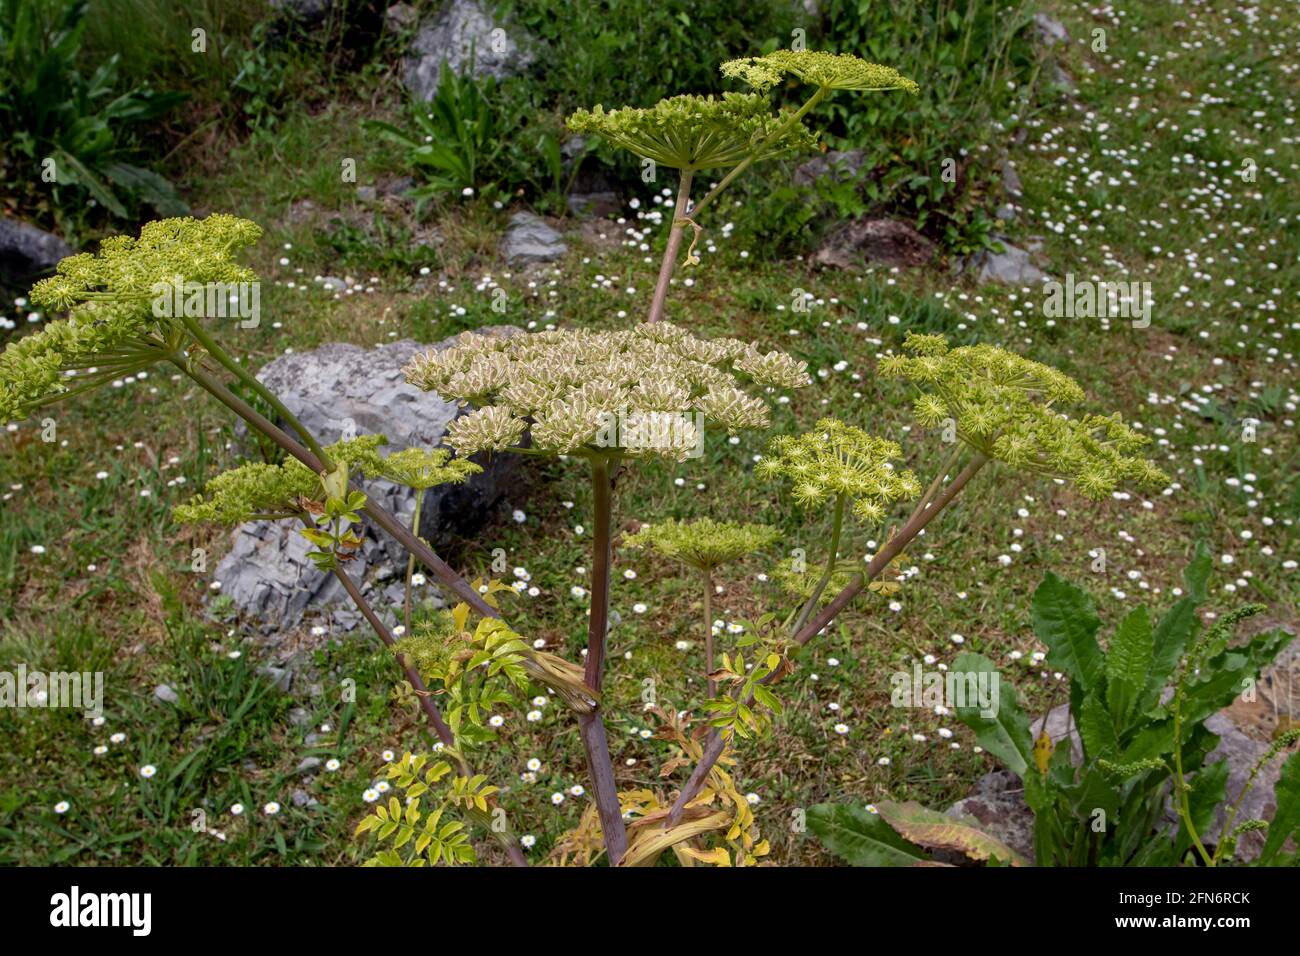 Angelica pachycarpa or portuguese or shiny leaved plant with flowers and seeds Stock Photo